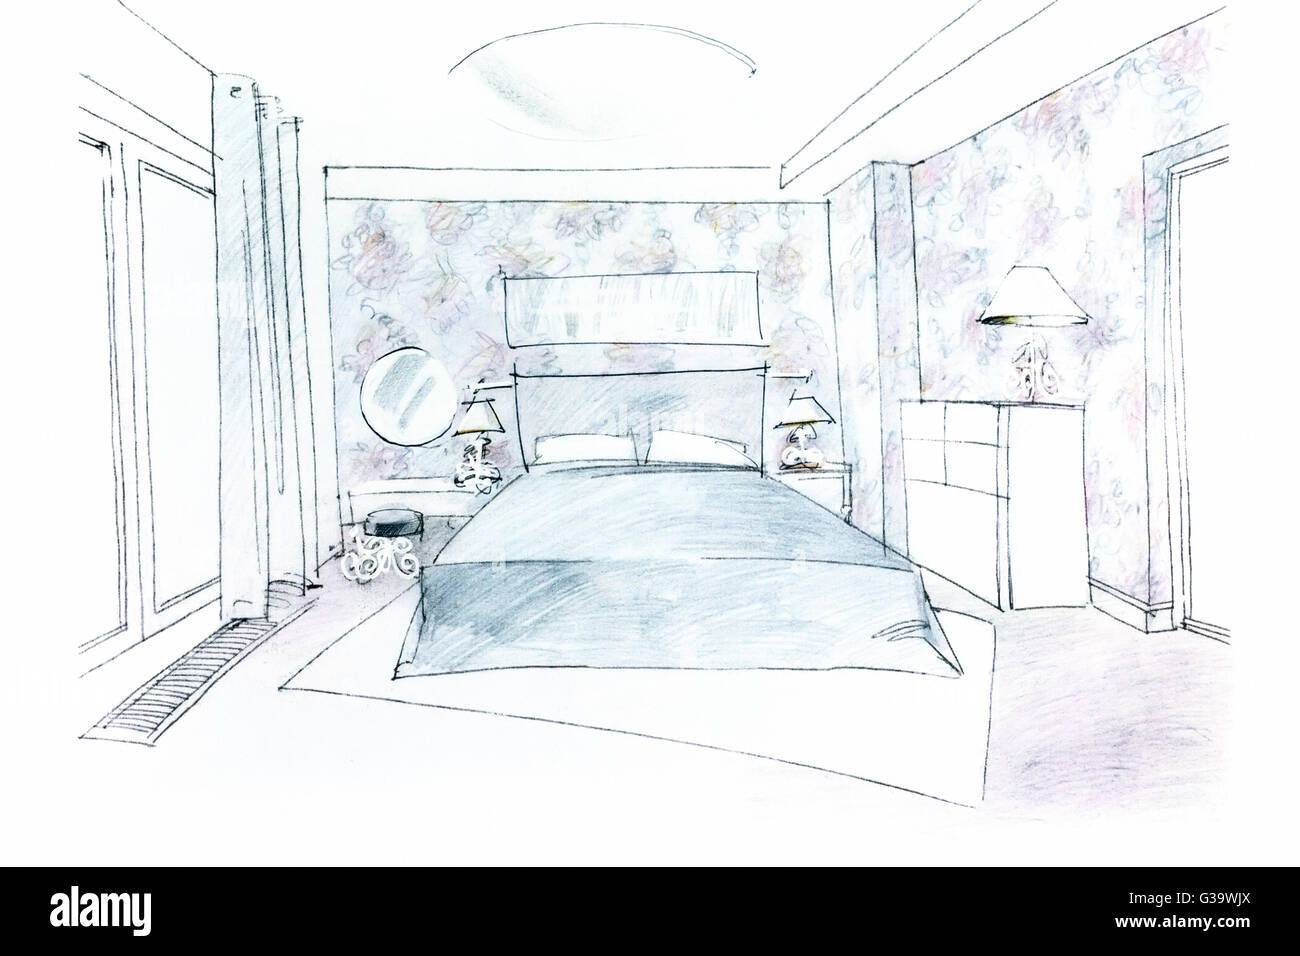 sketch of a roomy bedroom with a big bed and other furniture Stock Photo